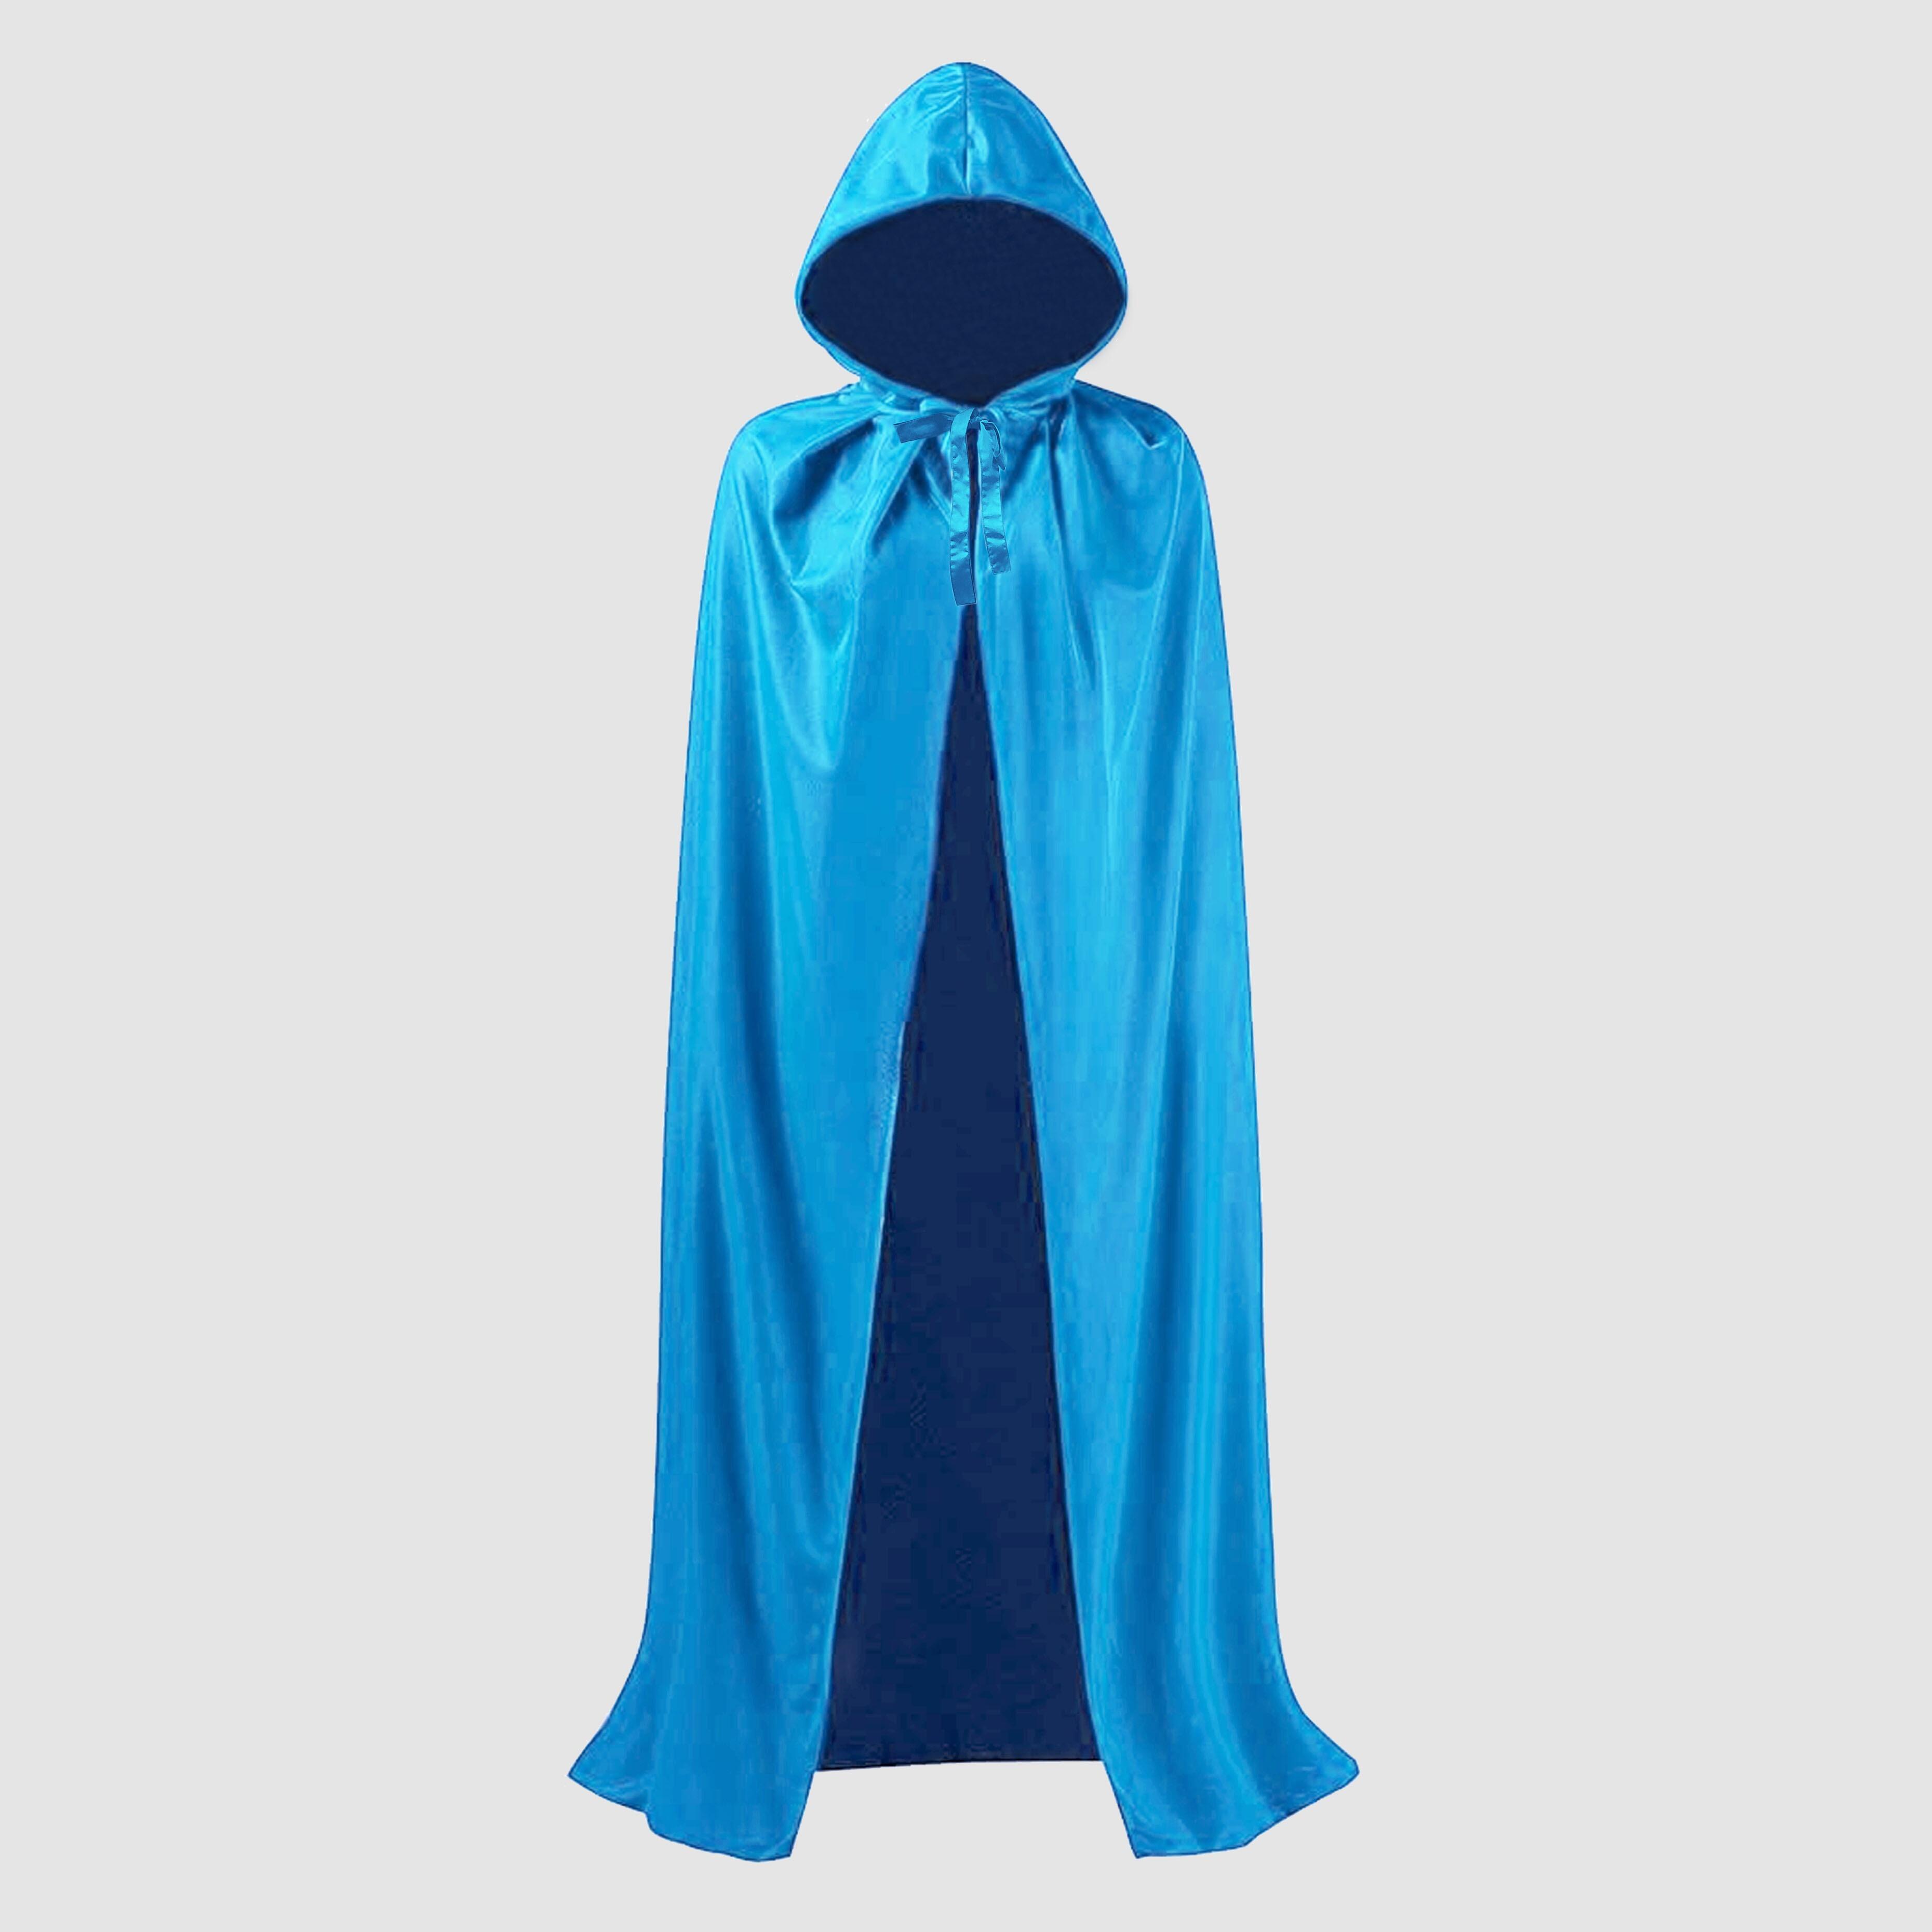 Nibano Hooded Show Gown Turquoise